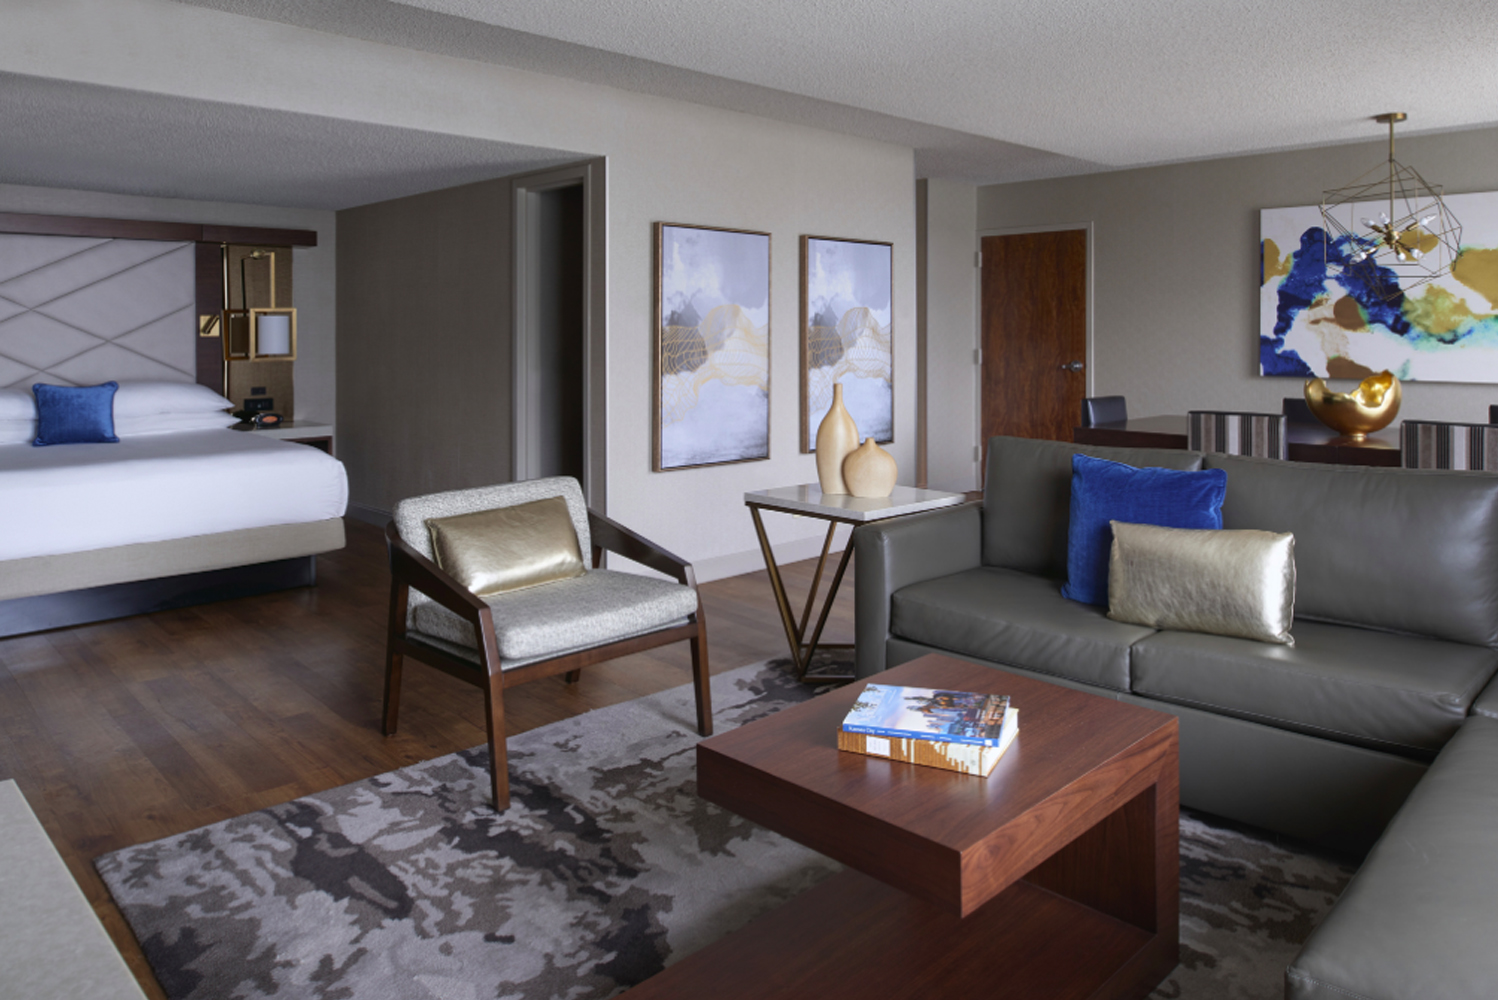 Hospitality interior design firm Paradigm Design Group unveiled a new full redesign of the Kansas City Airport Marriott 